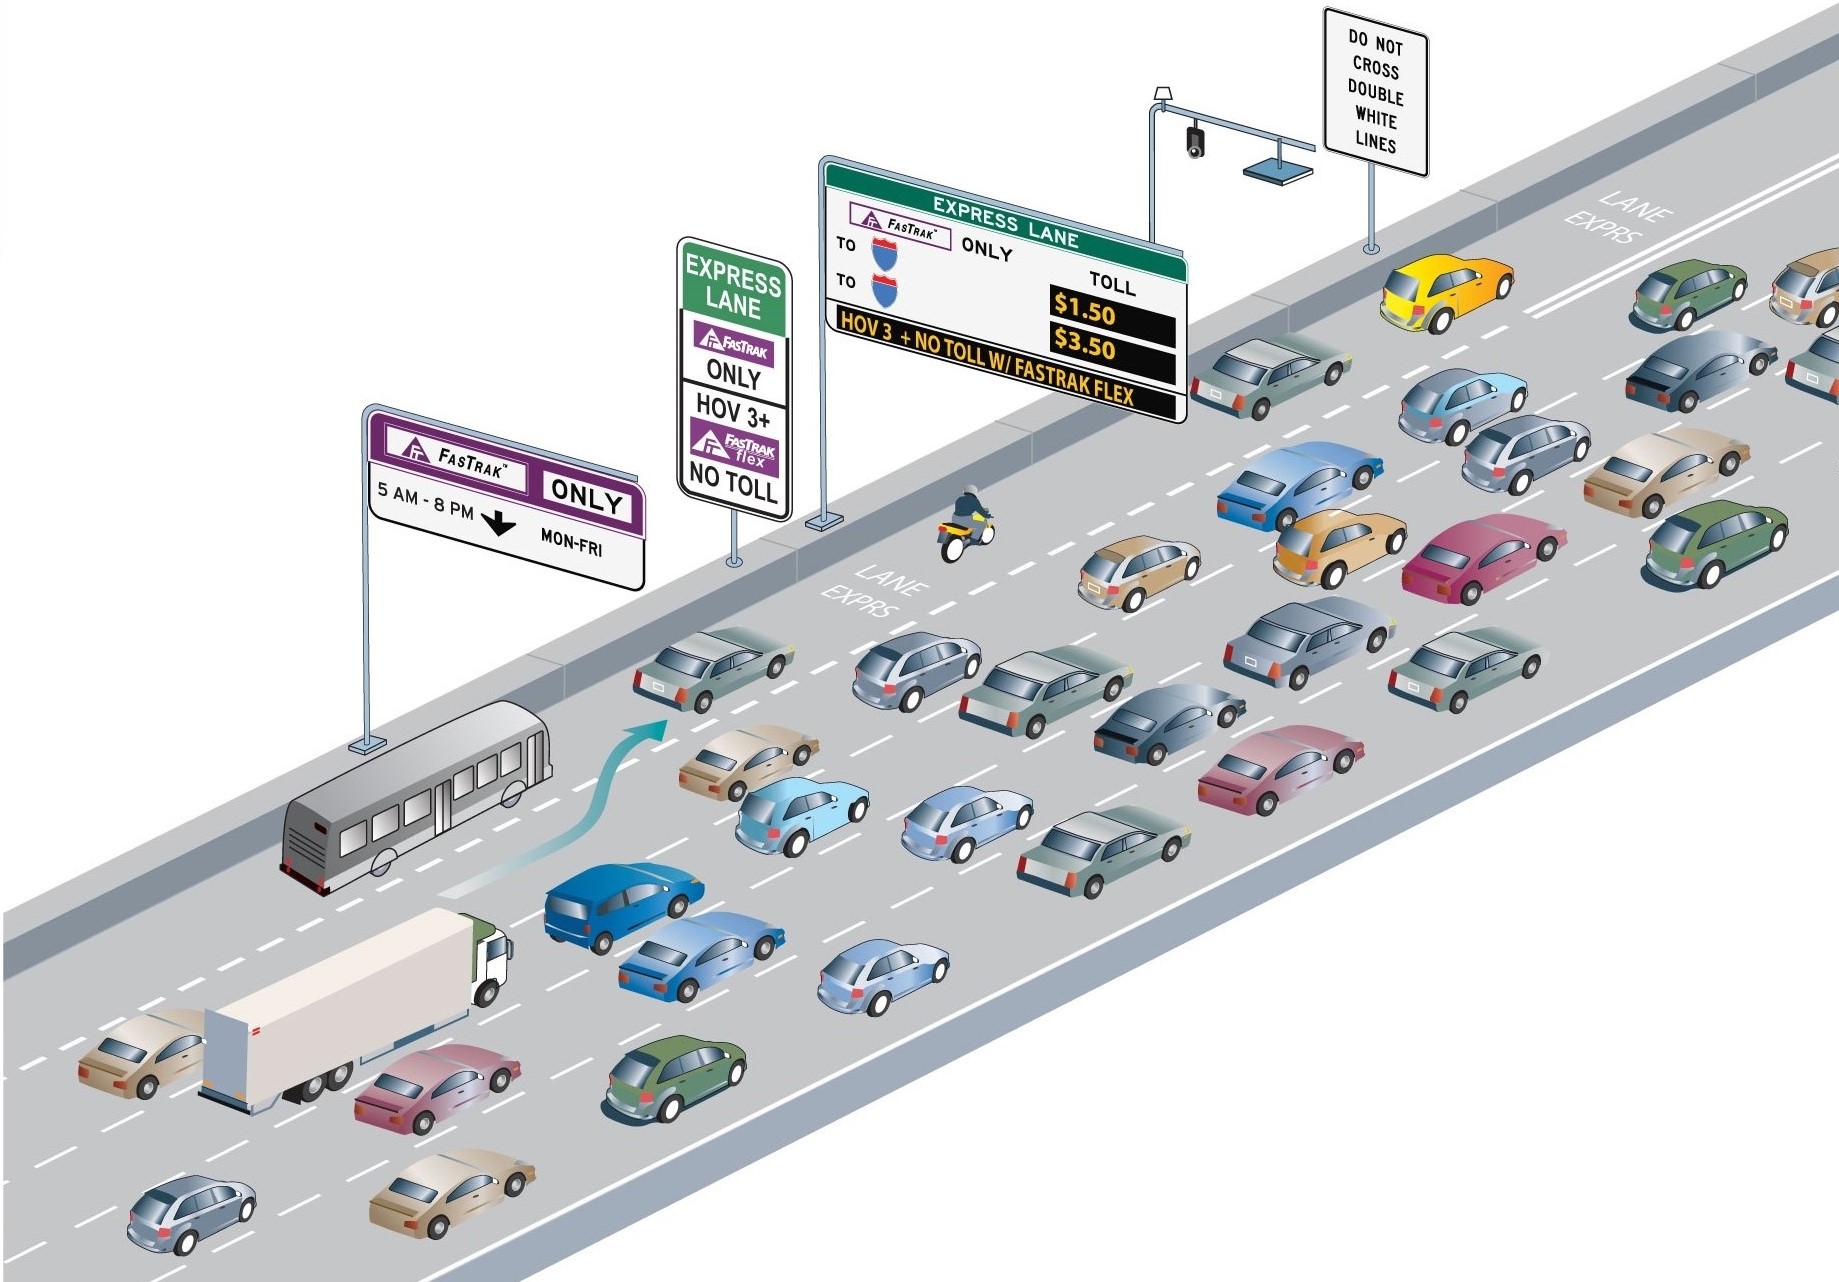 What is an Express Lane? Buses and 3+ carpools drive for free, other drivers can choose to pay, electronic toll collection, dynamic tolls (congestion pricing) keep lane free flowing.